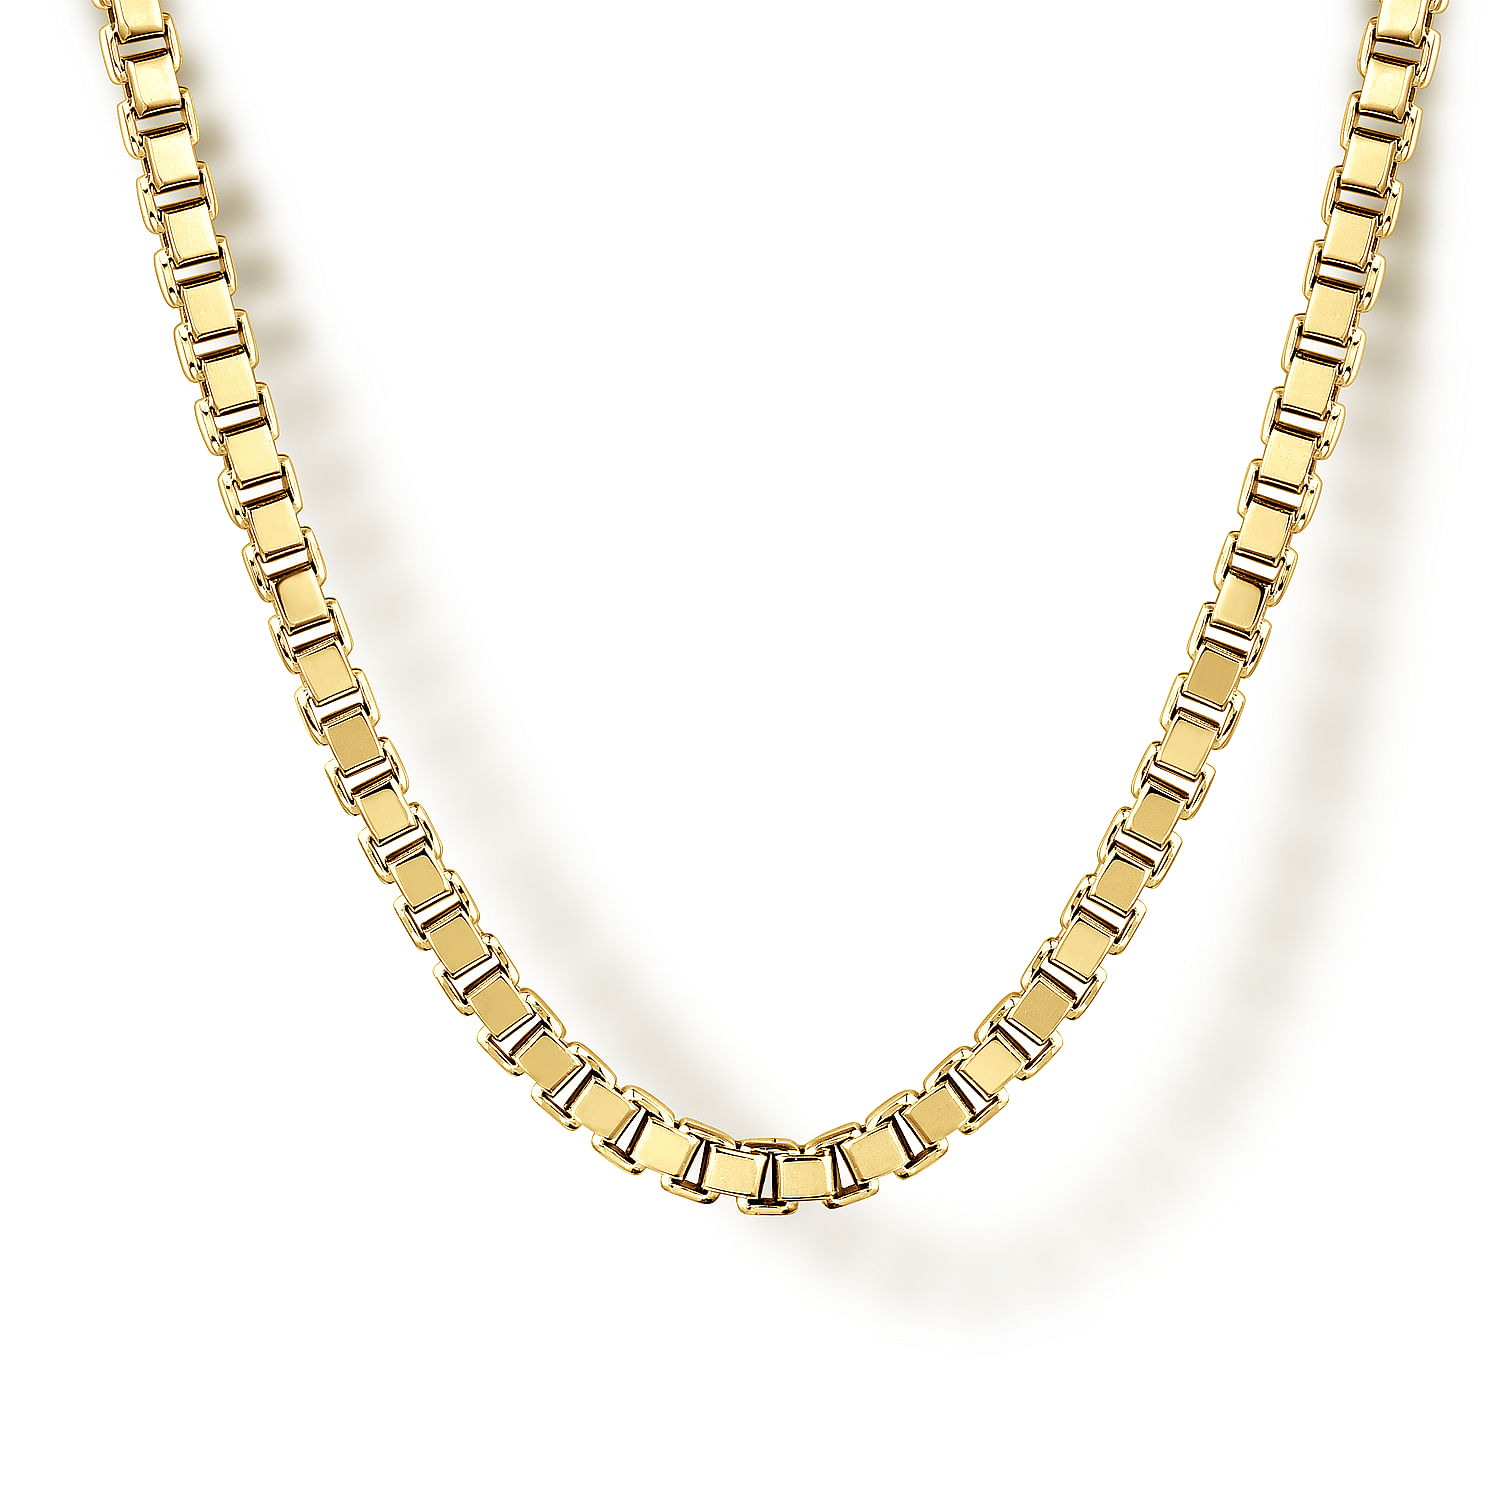 20 Inch 2.5mm 14K Yellow Gold Solid Men's Box Chain Necklace